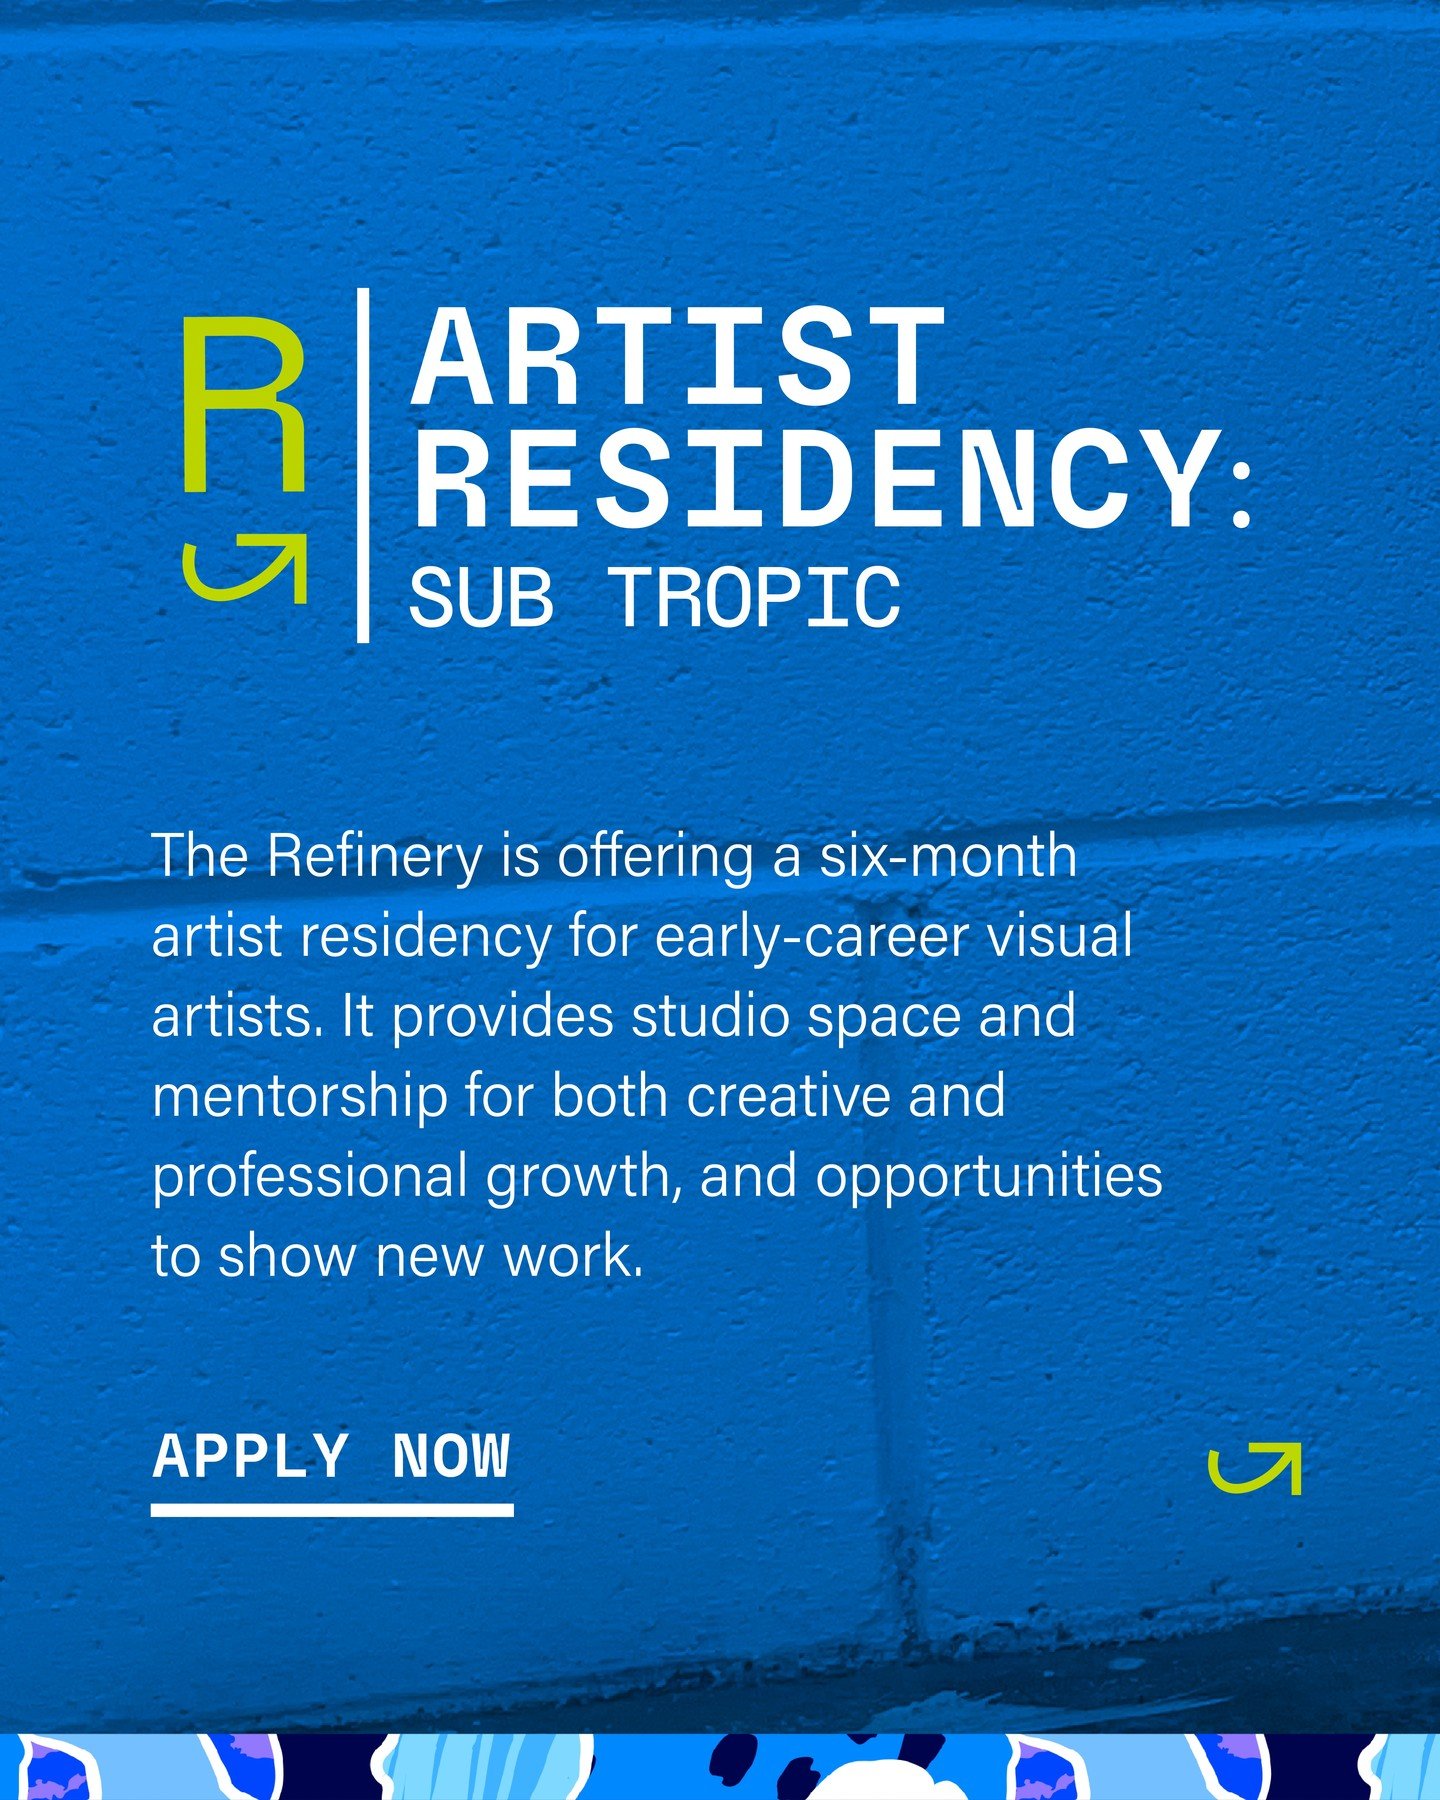 R|Artist Residency: Sub Tropic is now open for application 

Open to visual artists wanting to experiment within their practice. This exciting six-month residency offers early-career visual artists a large studio space, mentoring and the opportunity 